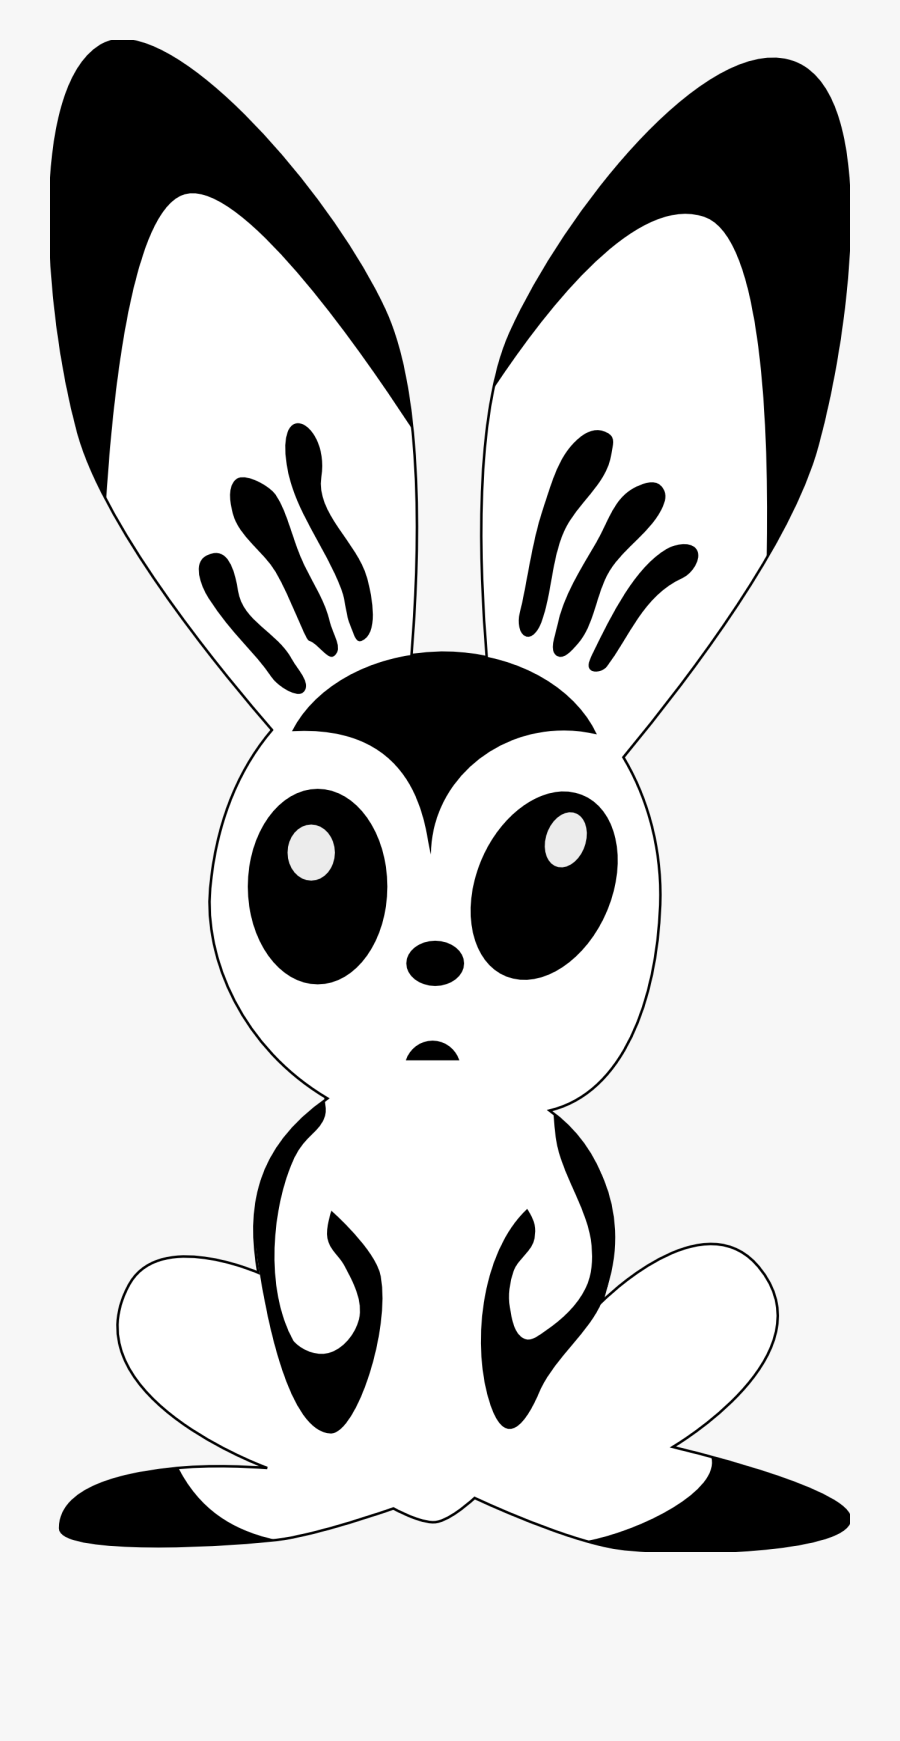 Hare By Rones Rabbit Black White Line Easter 555px - Rabbit Dance Clipart Black And White, Transparent Clipart